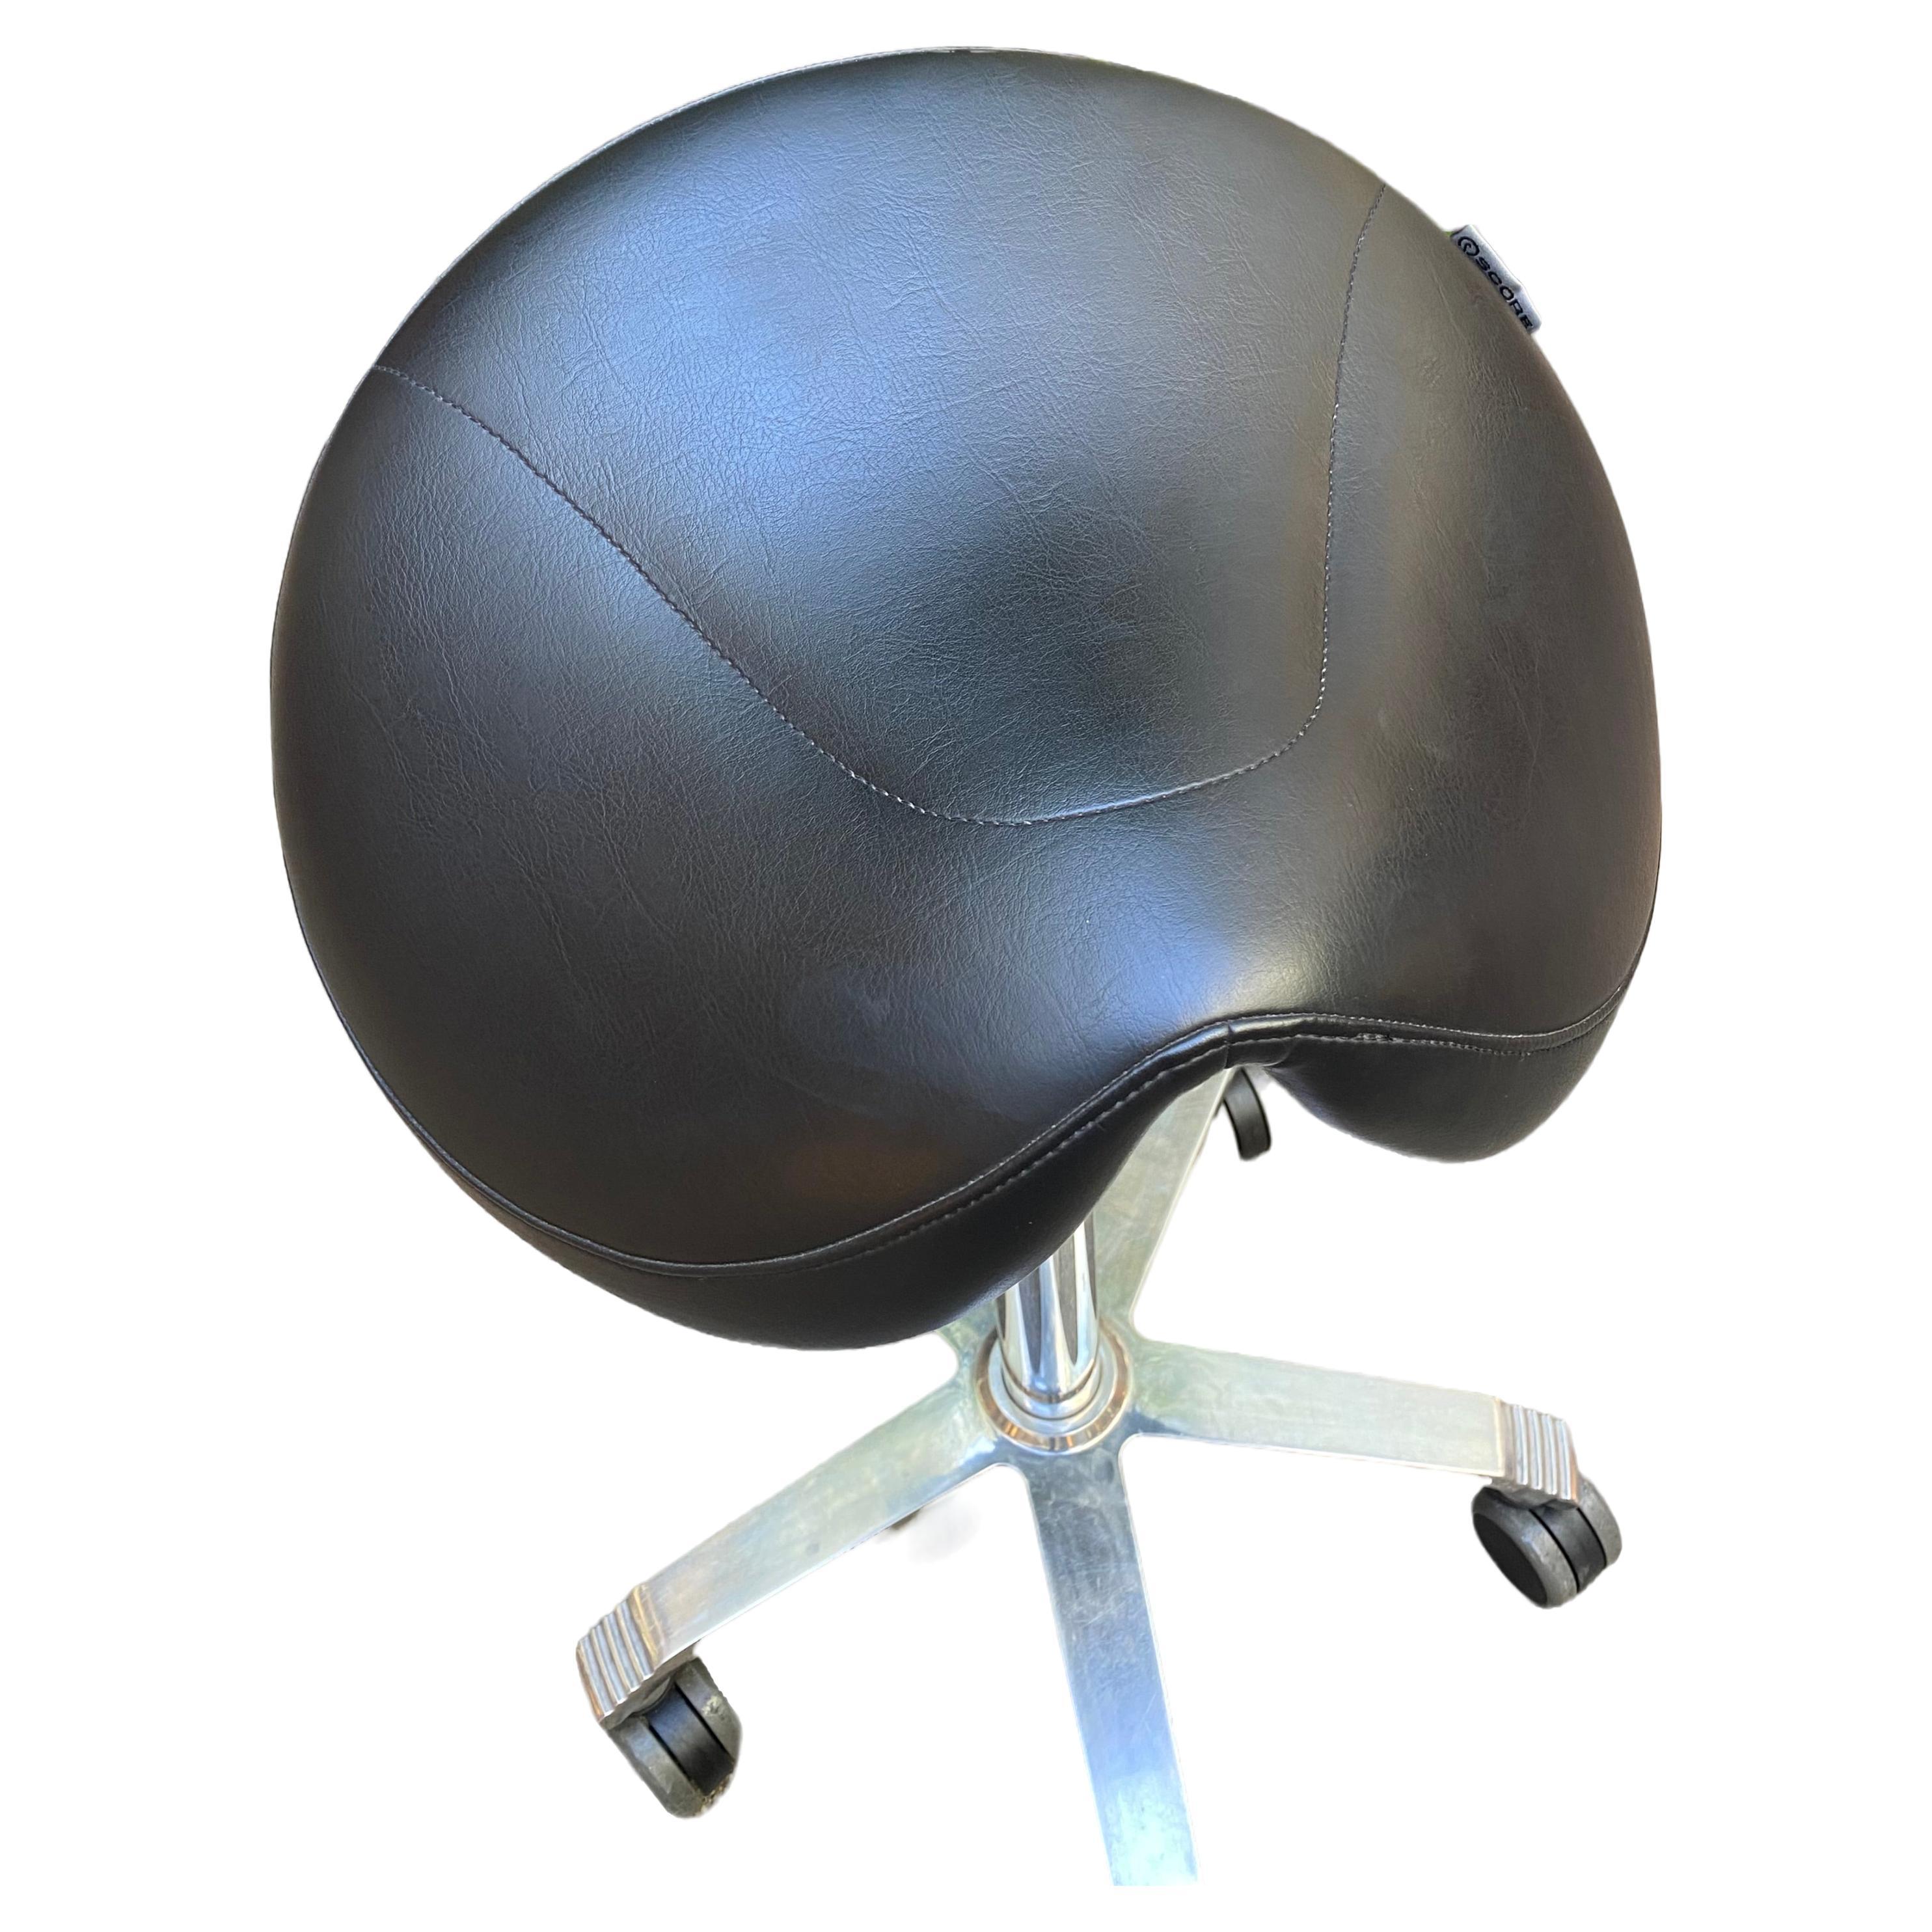 Saddle stool
“Jumper Balance Seamless” / Score Edition
stainless steel and Stamskin
L 44 x D 30
Adjustable height and seat
Circa 2020
In perfect condition